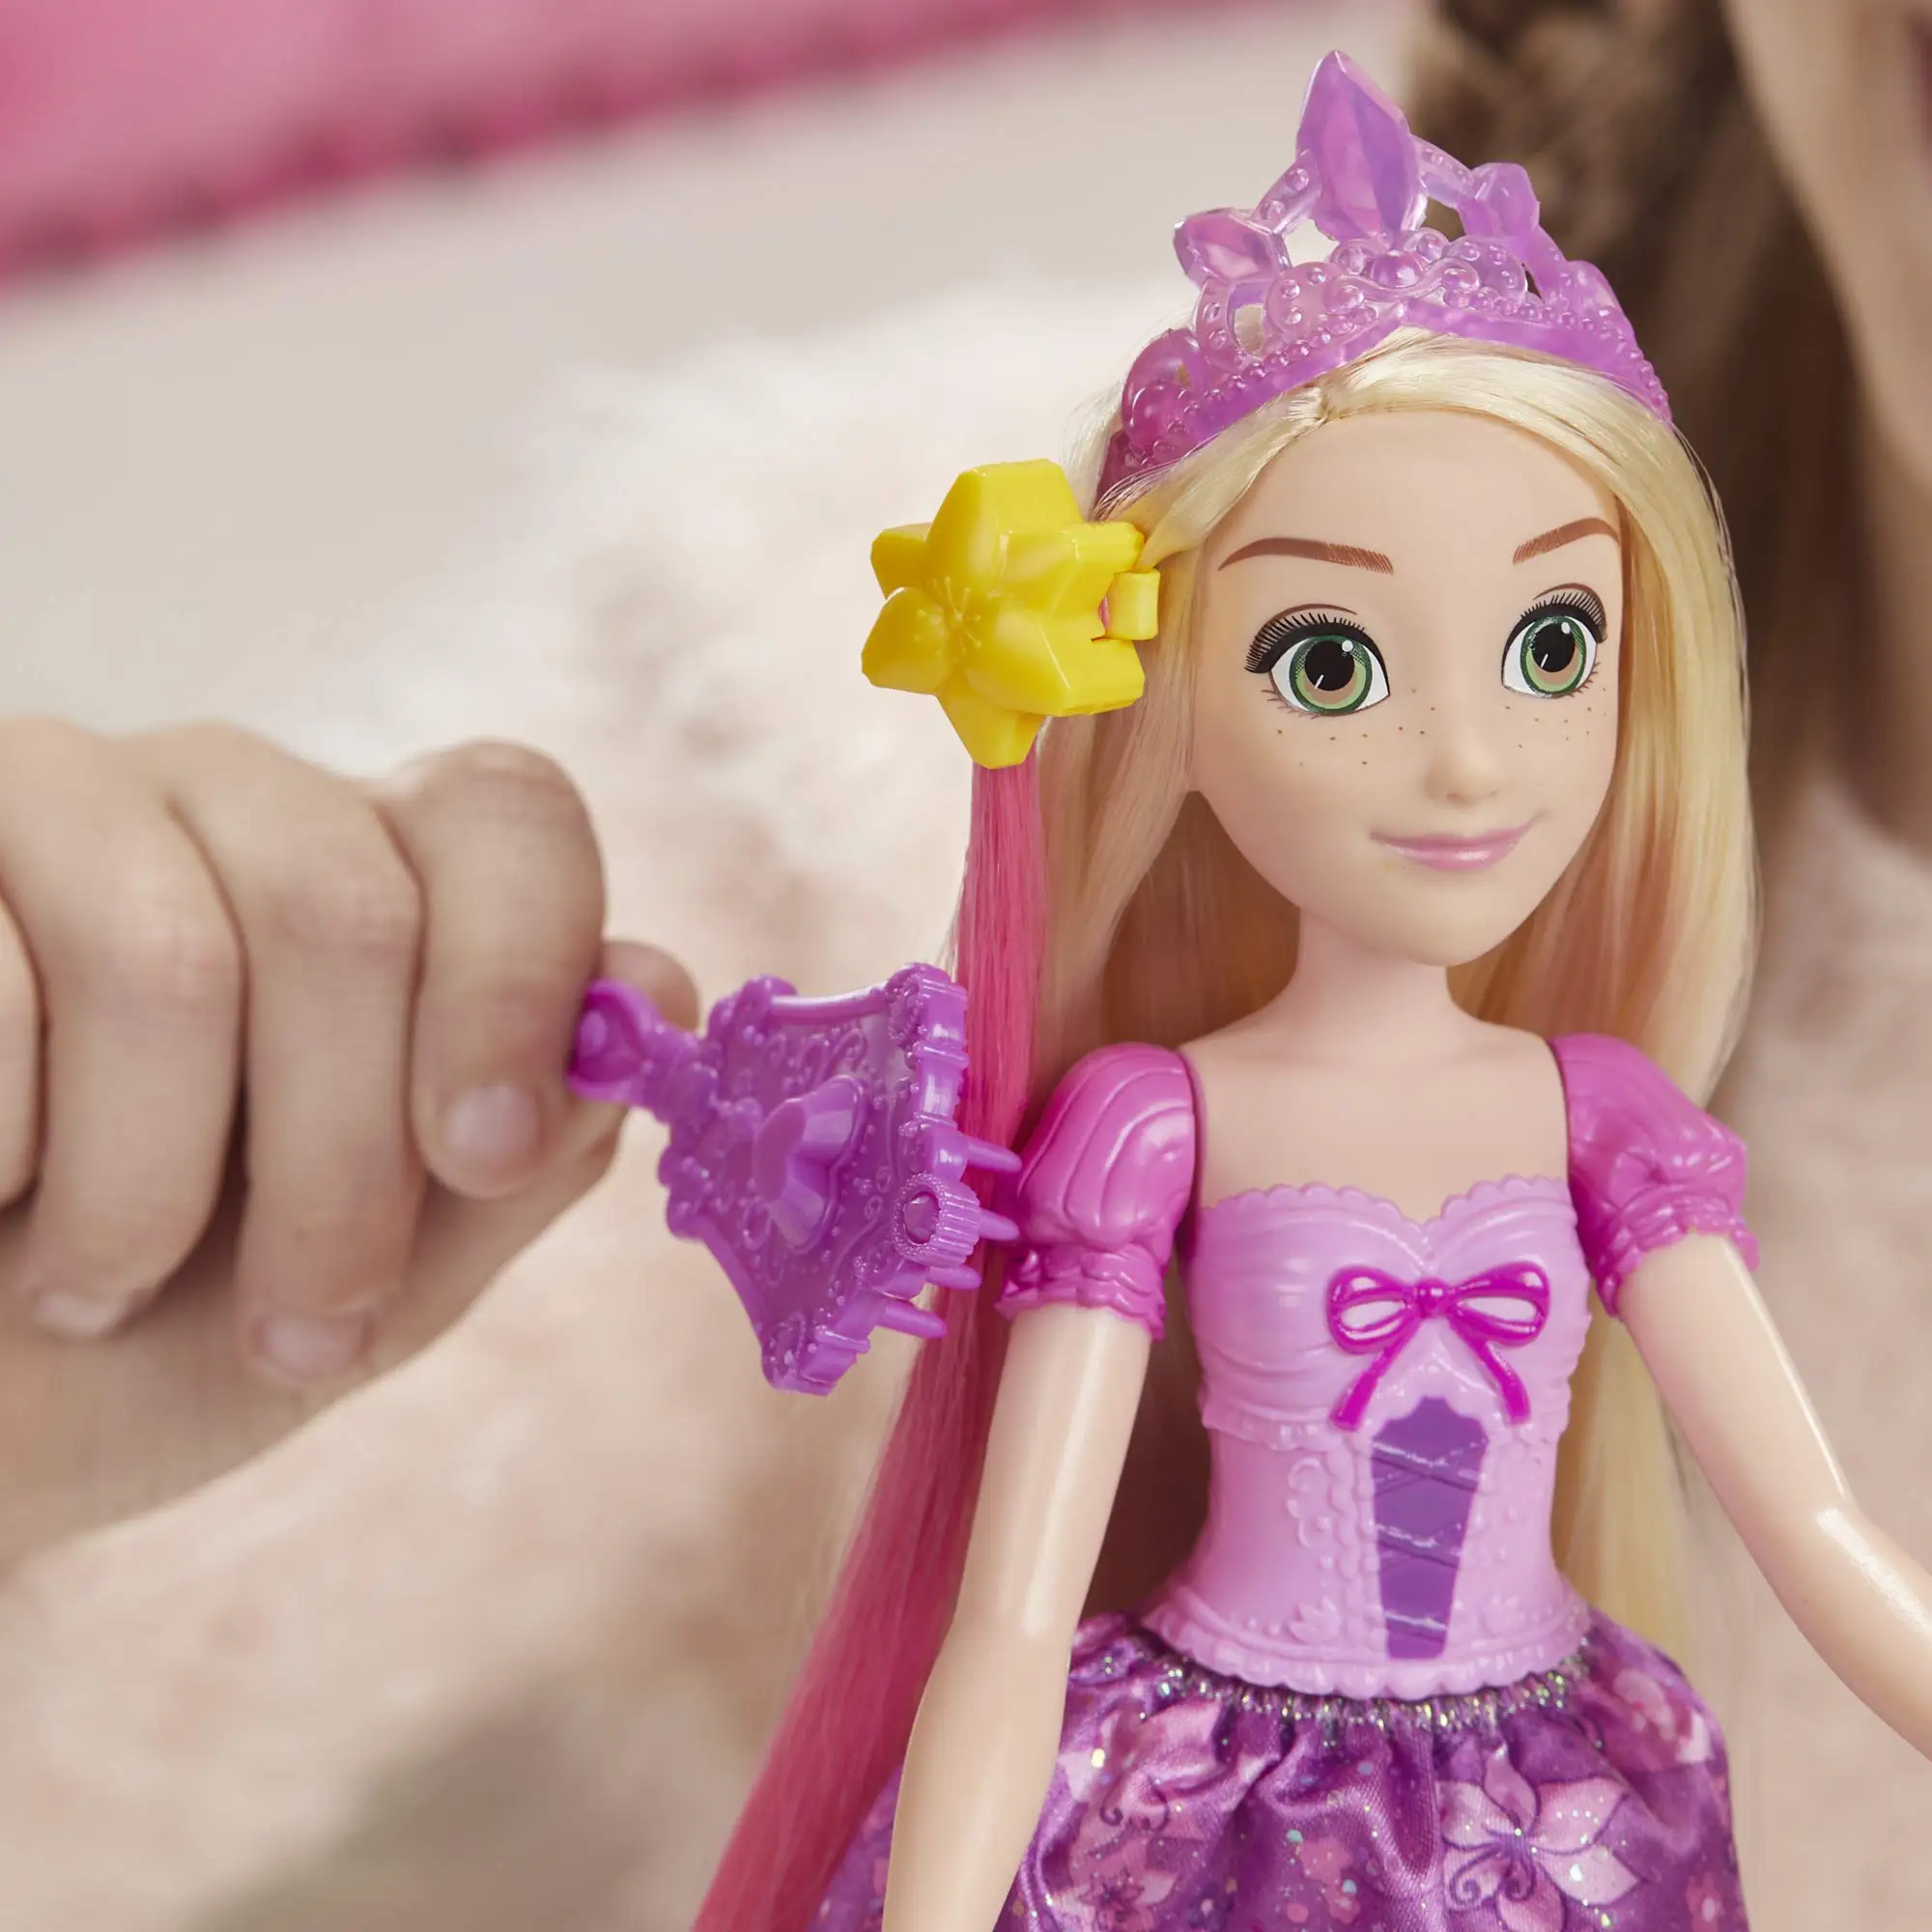 Disney Princess Hair Style Creations Rapunzel Fashion Doll Hair Styling Toy  with Brush Hair Extensions and Clips Toys for Girls